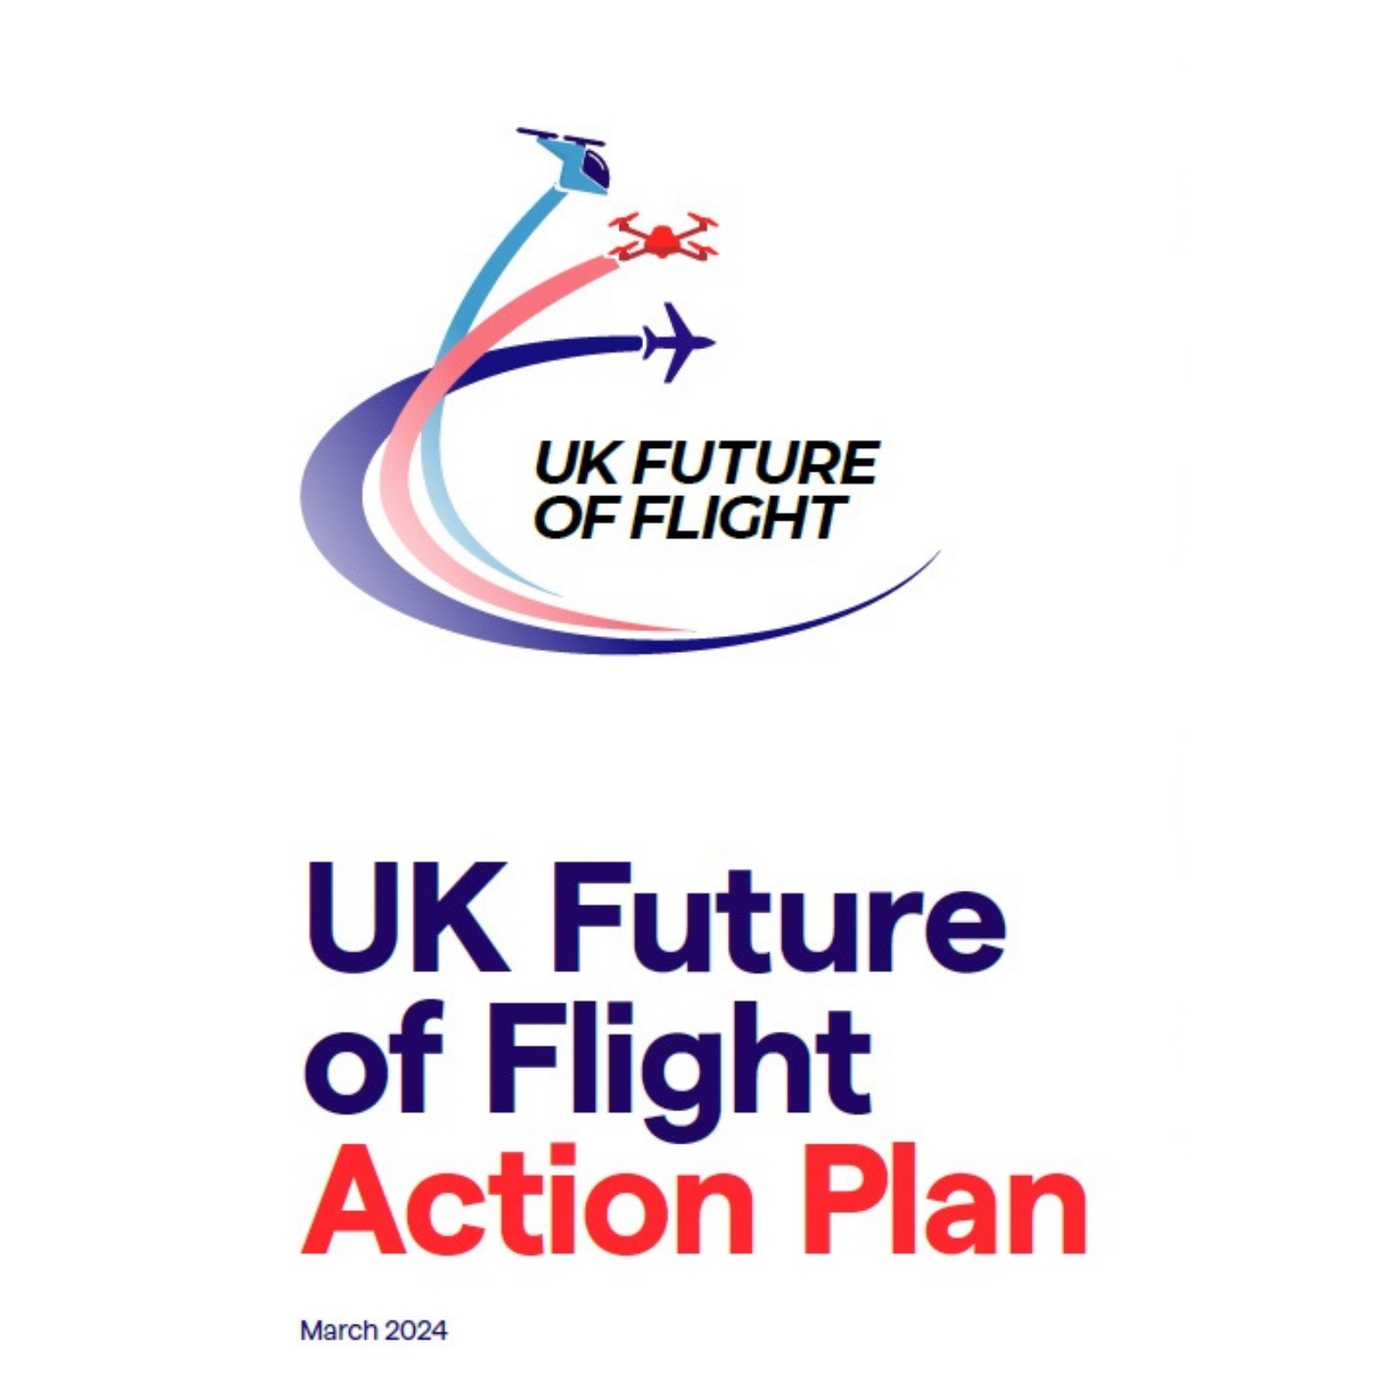 UK Government's Plan To Become a Drone Industry Leader by 2030